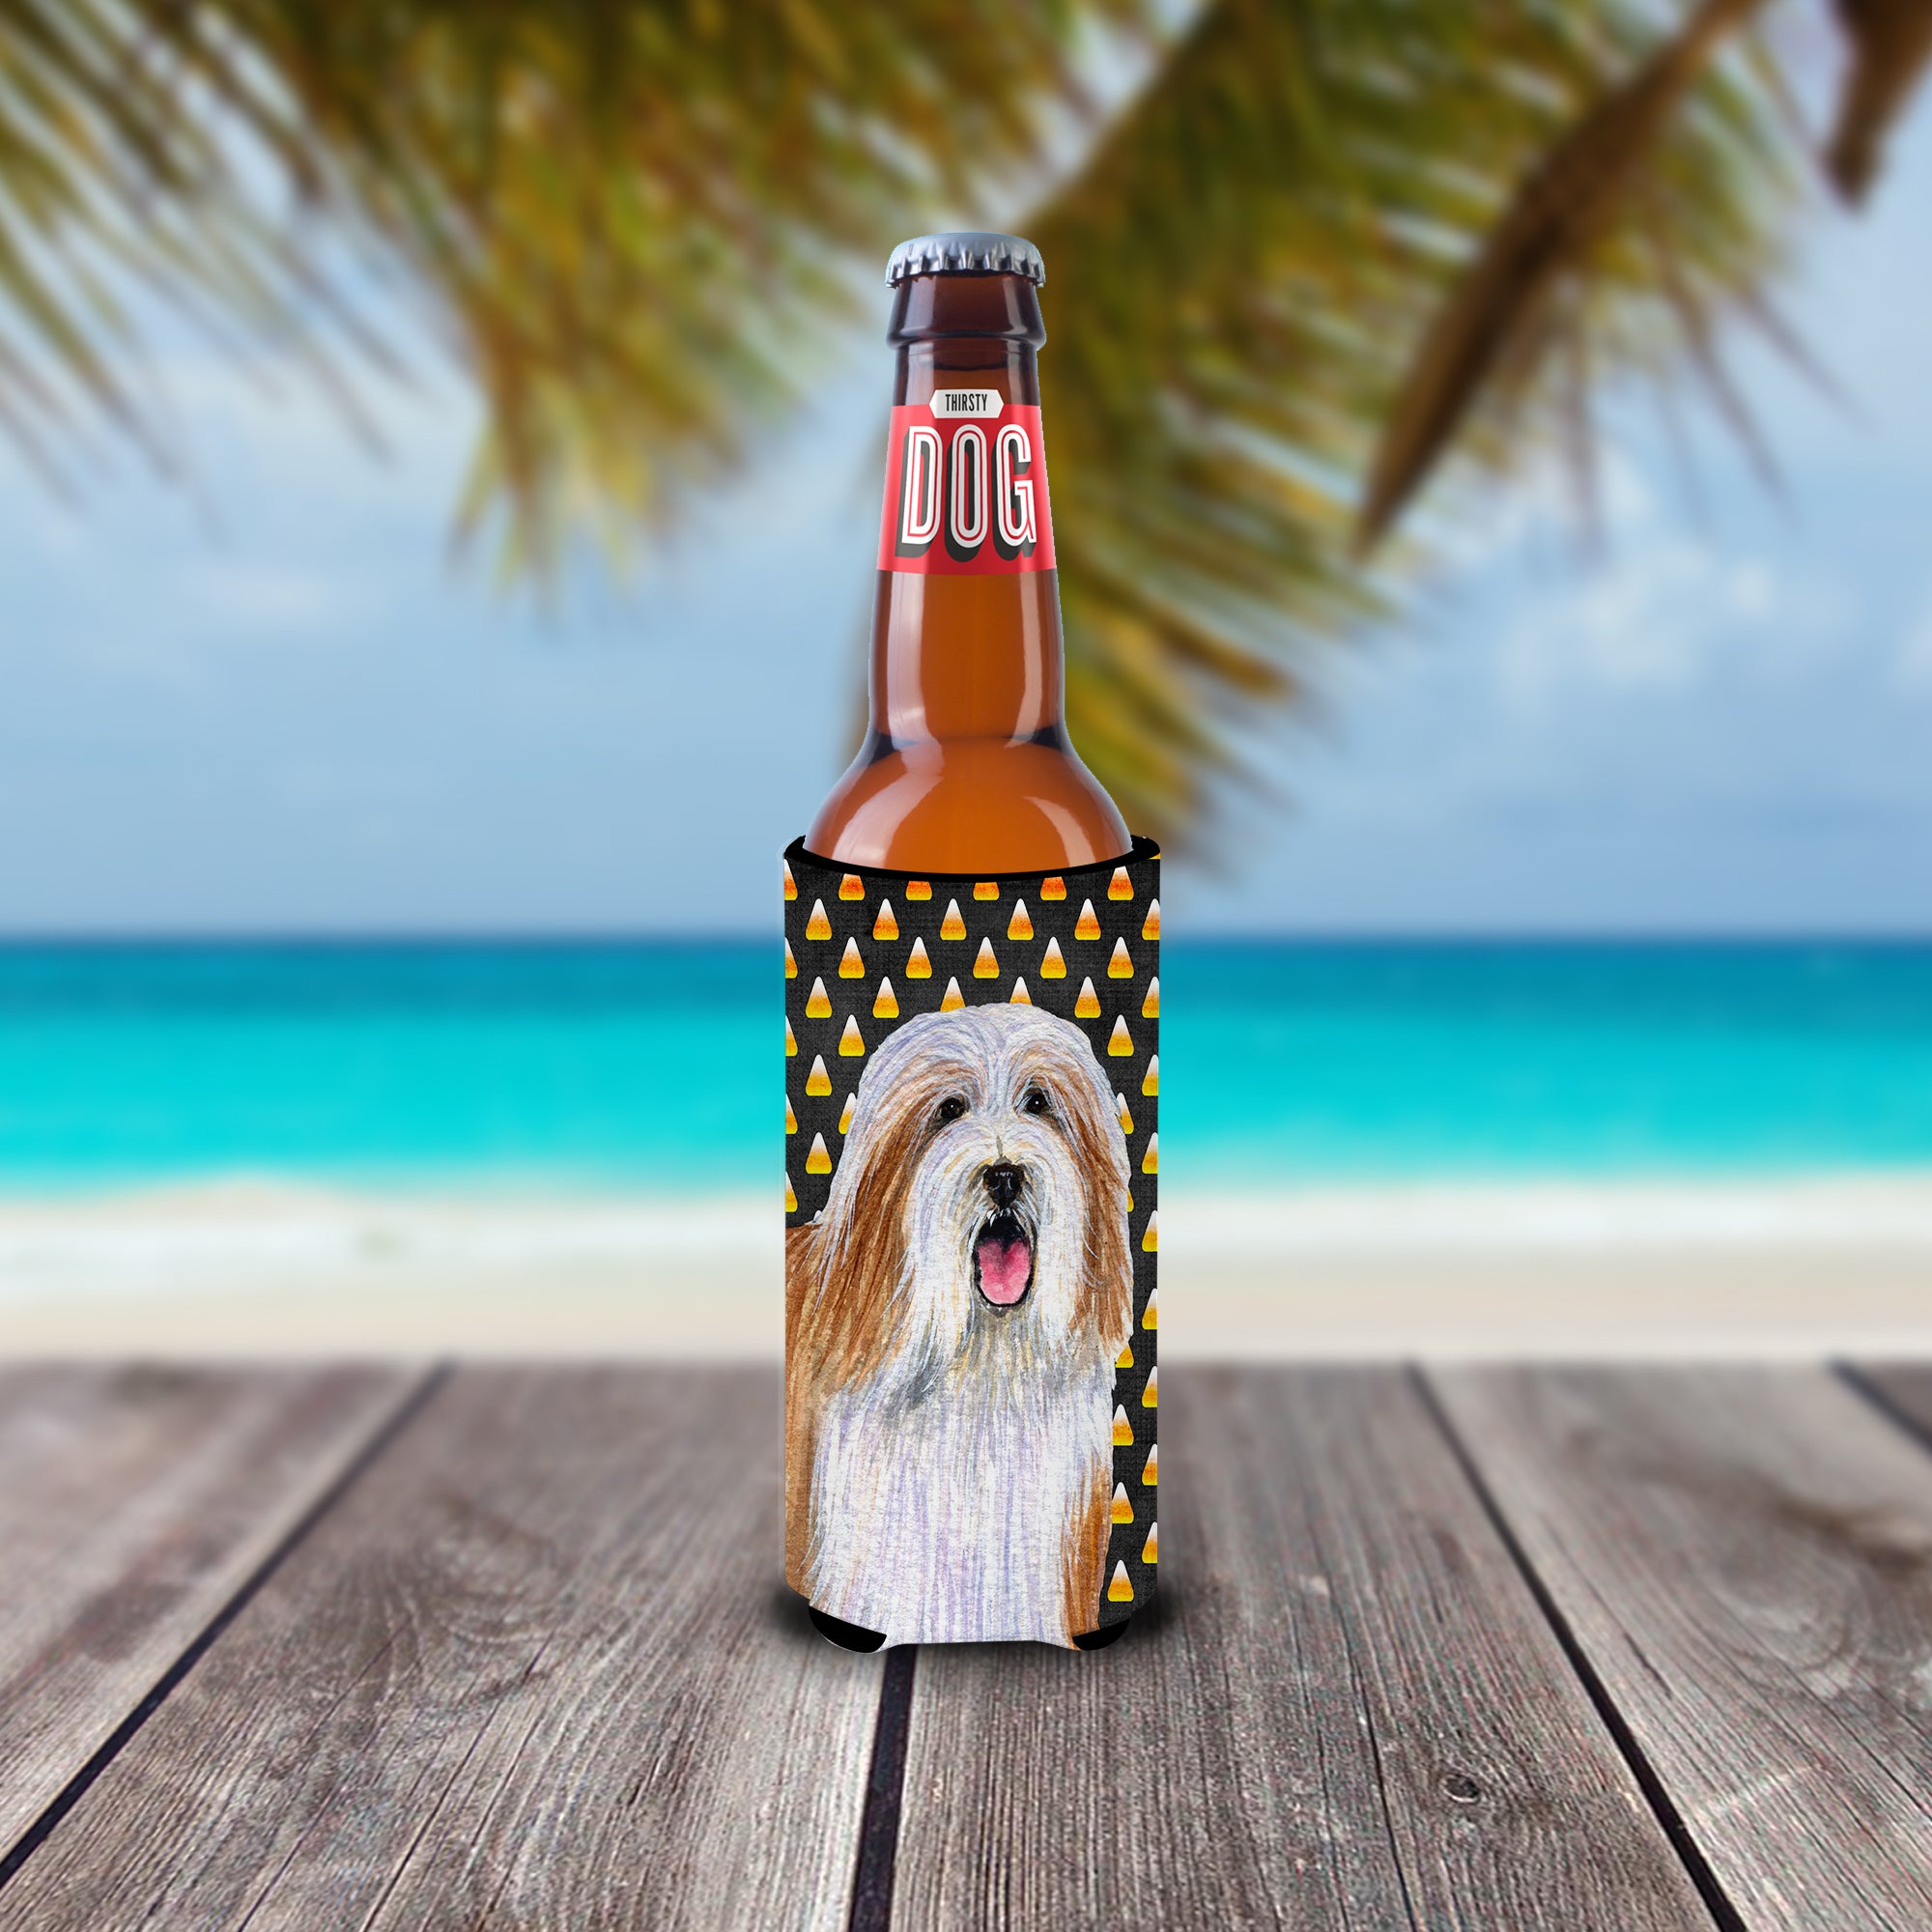 Bearded Collie Candy Corn Halloween Portrait Ultra Beverage Insulators for slim cans LH9071MUK.